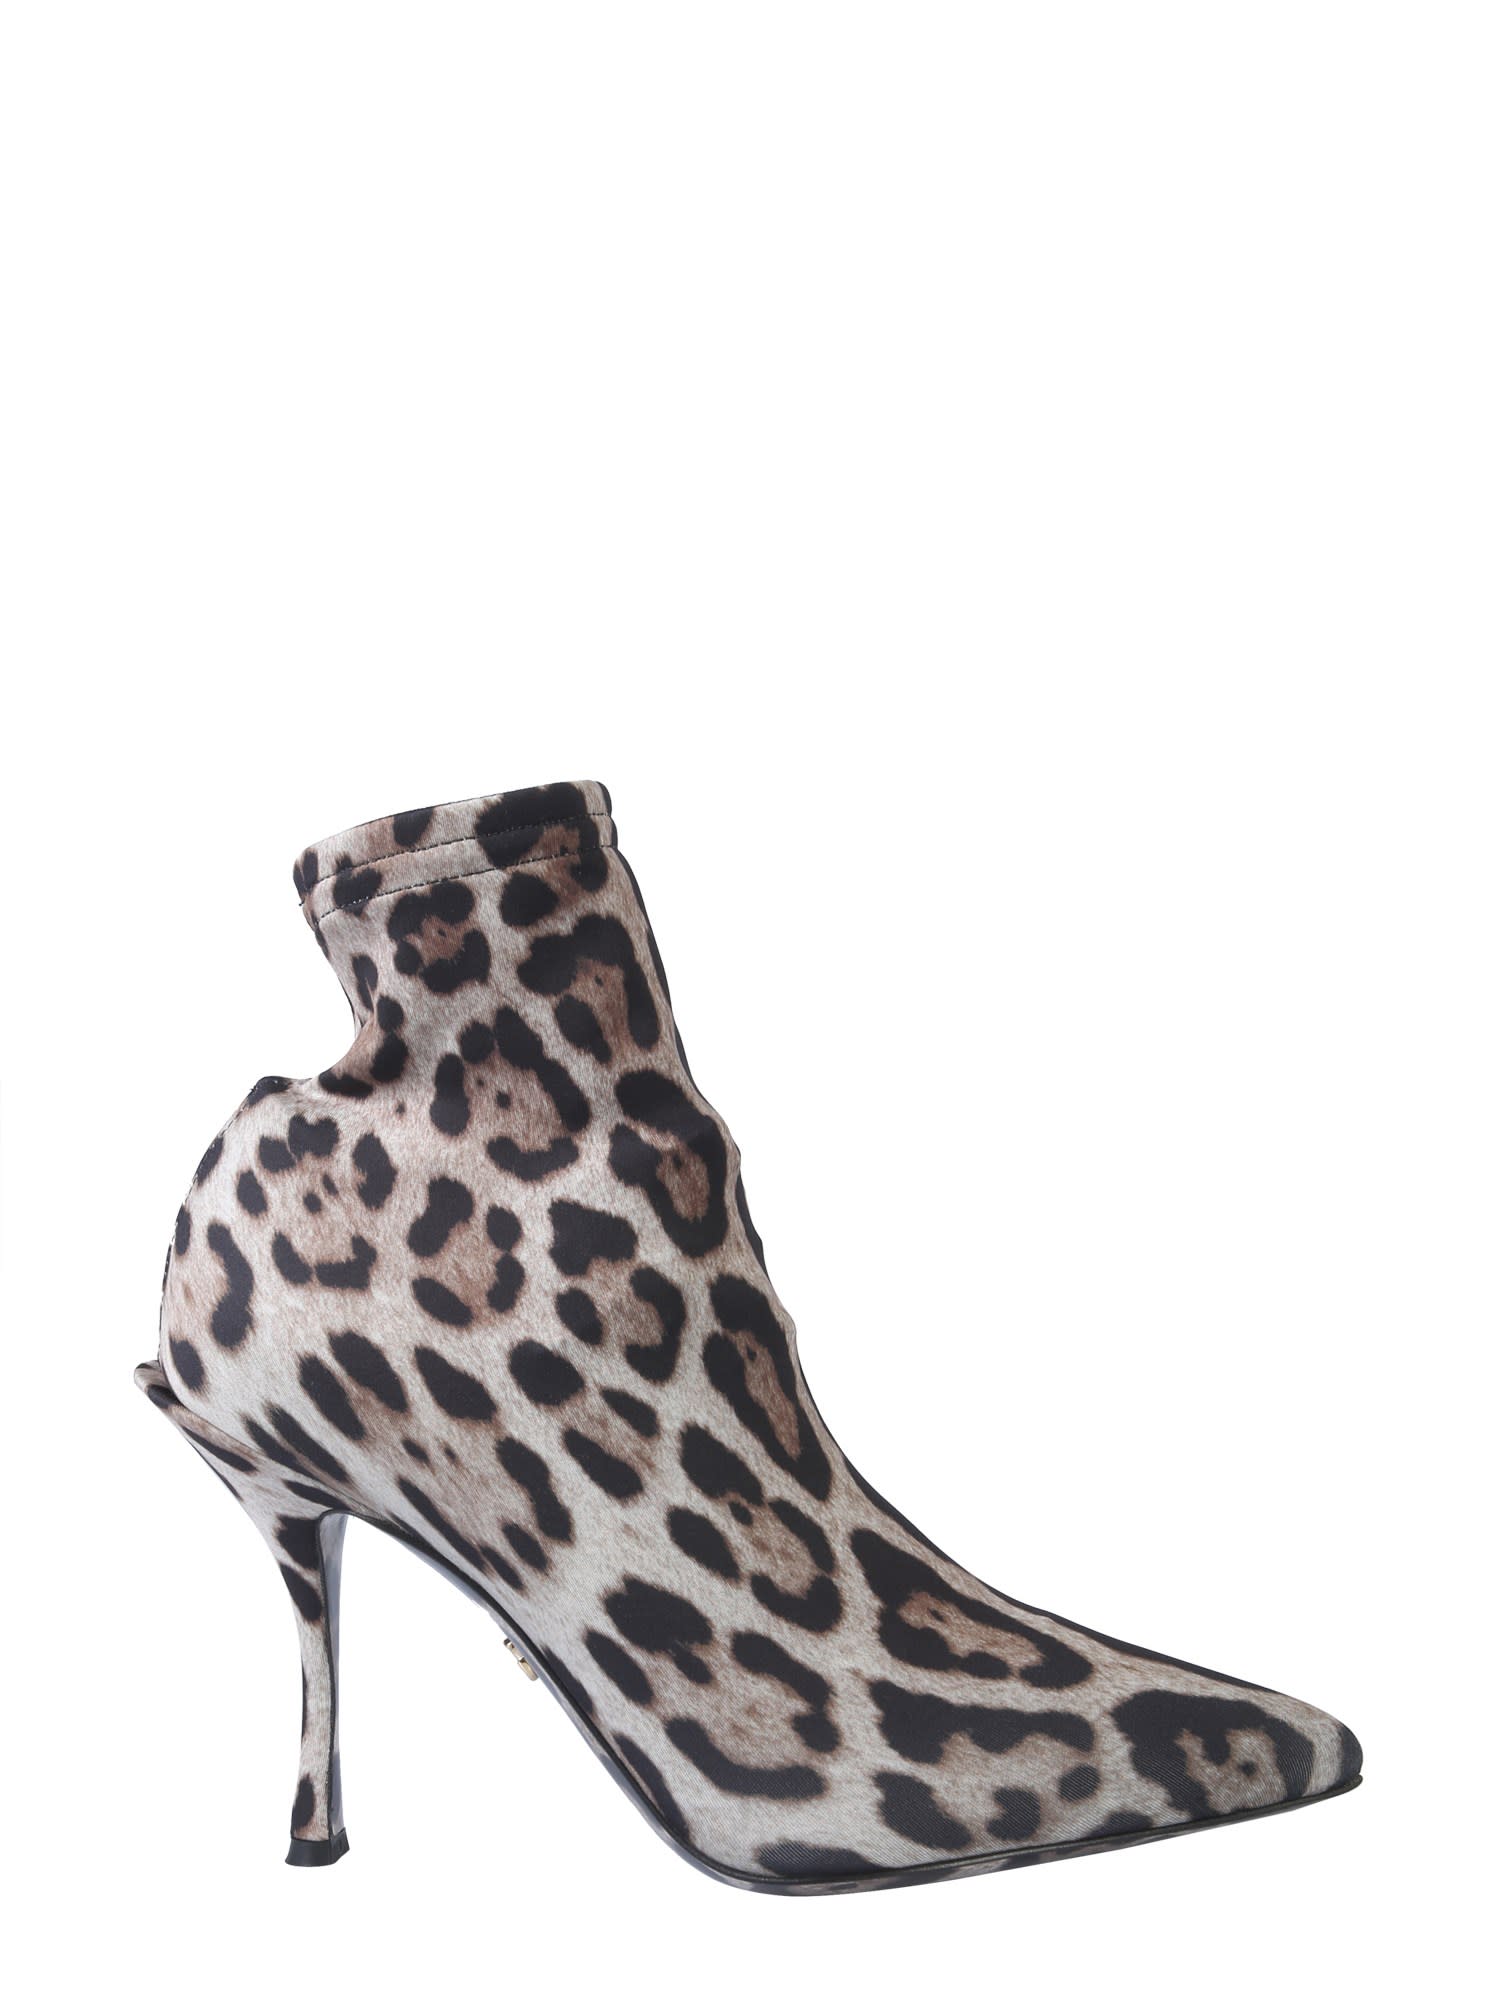 Buy Dolce & Gabbana Leo Printed Boot online, shop Dolce & Gabbana shoes with free shipping